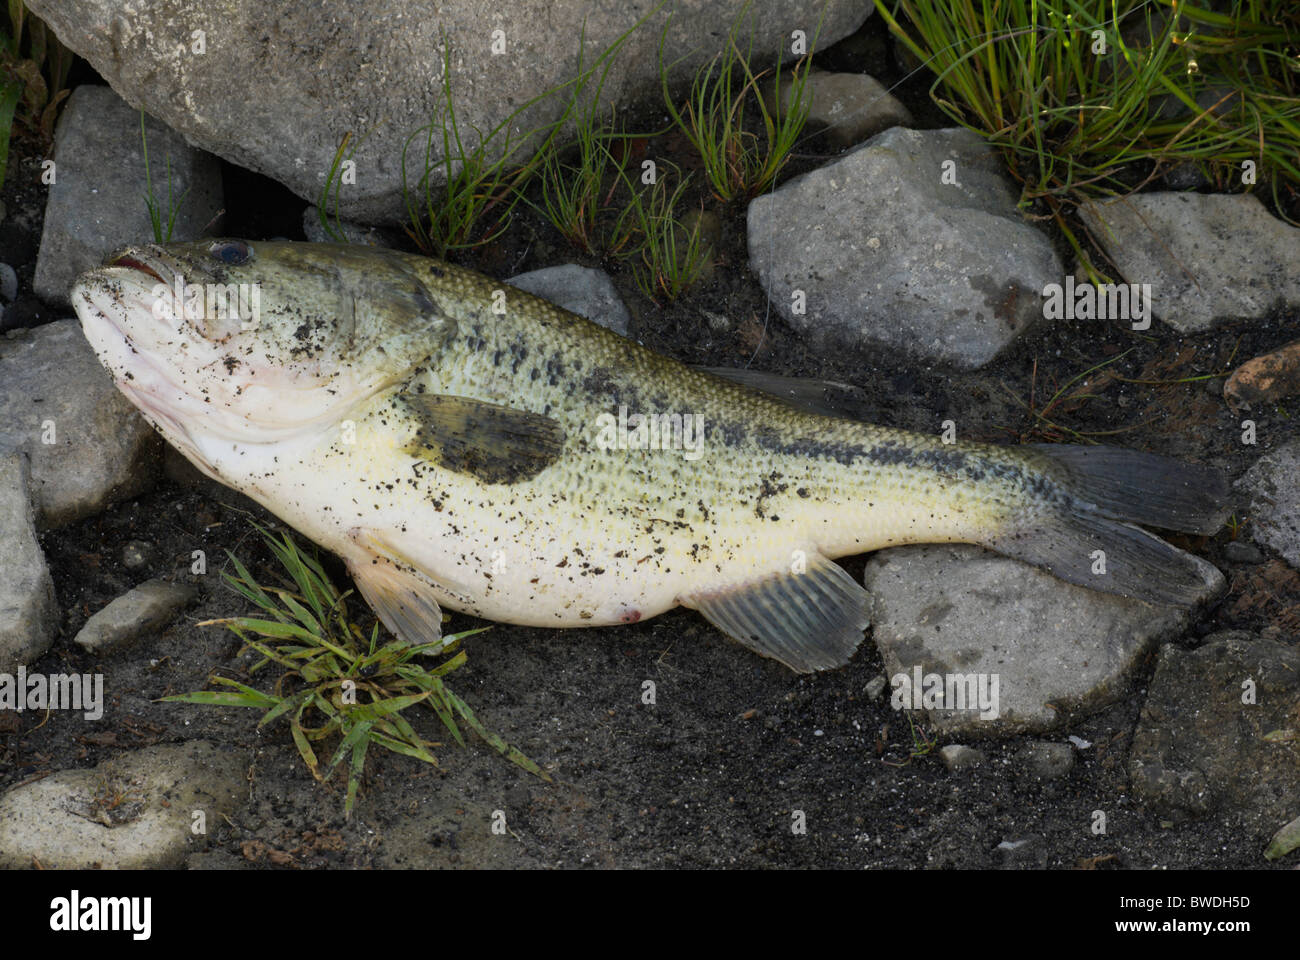 Micropterus salmoides (Largemouth bass) caught by a fisherman in a lake Stock Photo